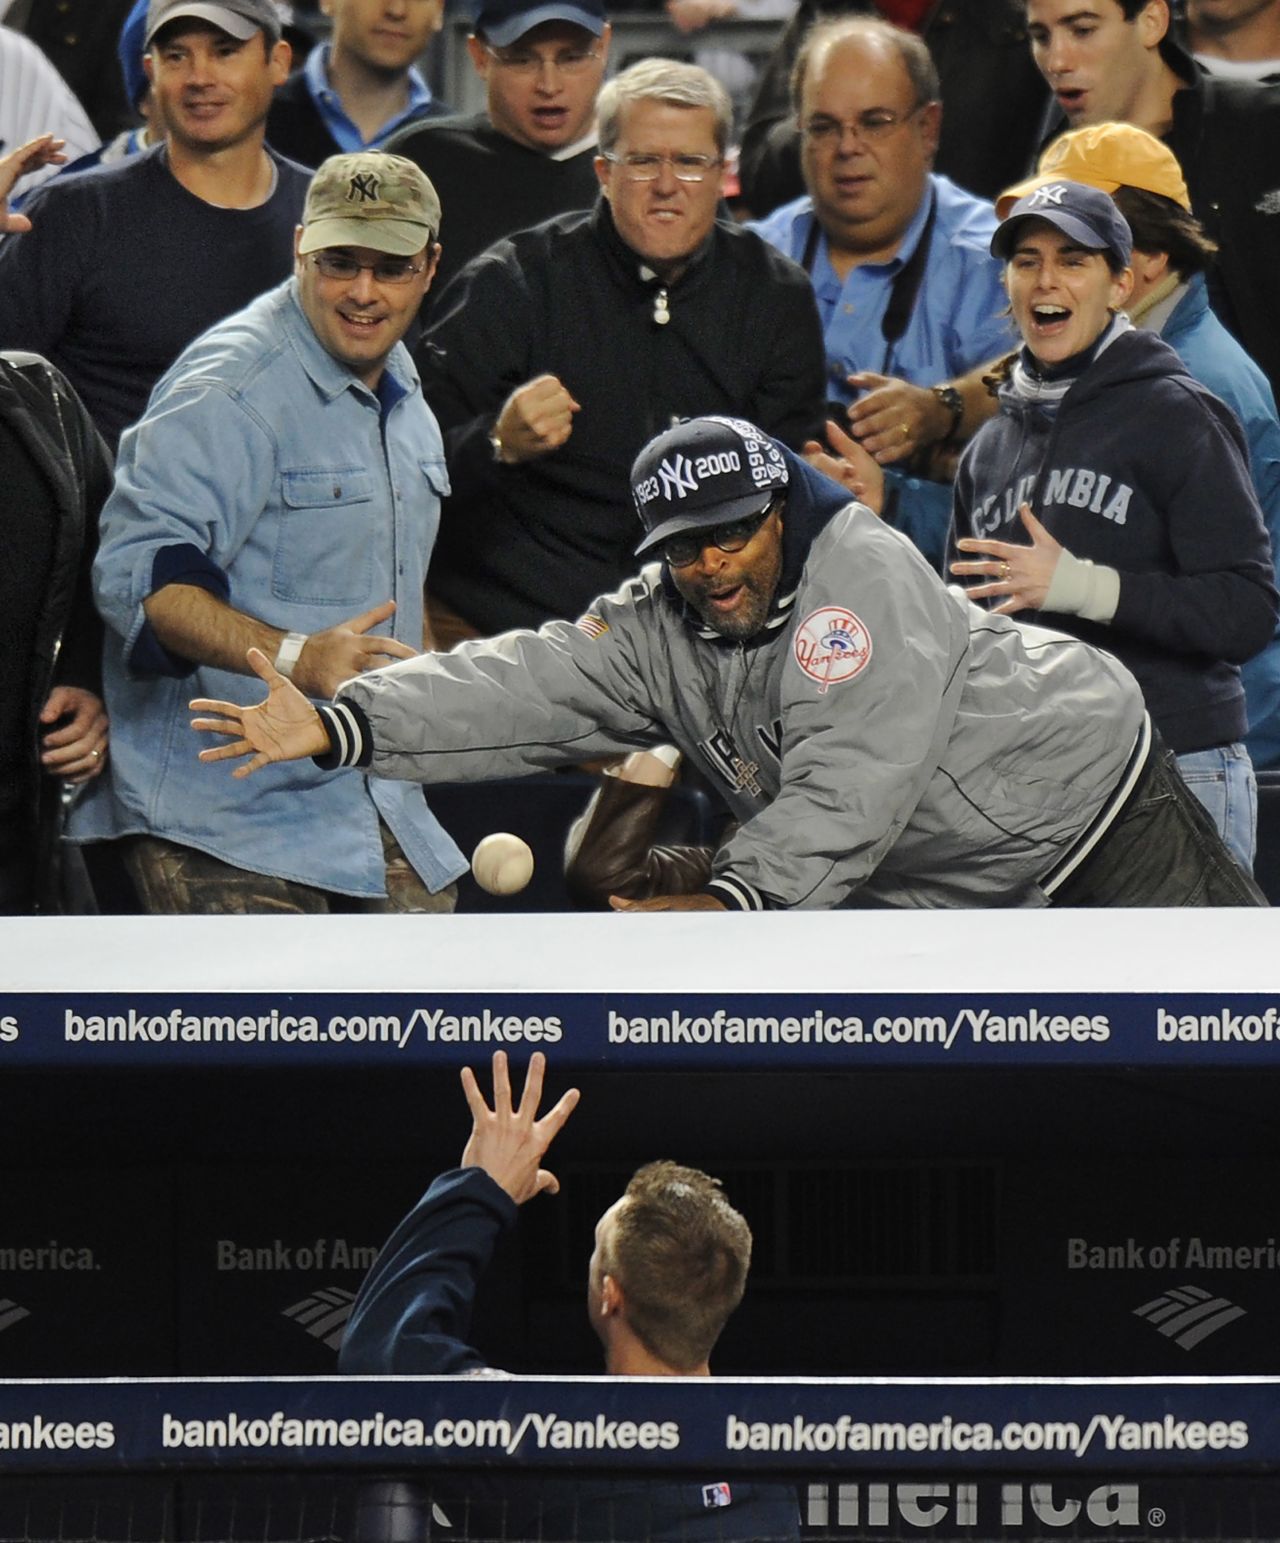 Lee tries to catch a ball during a World Series game in New York in 2009.